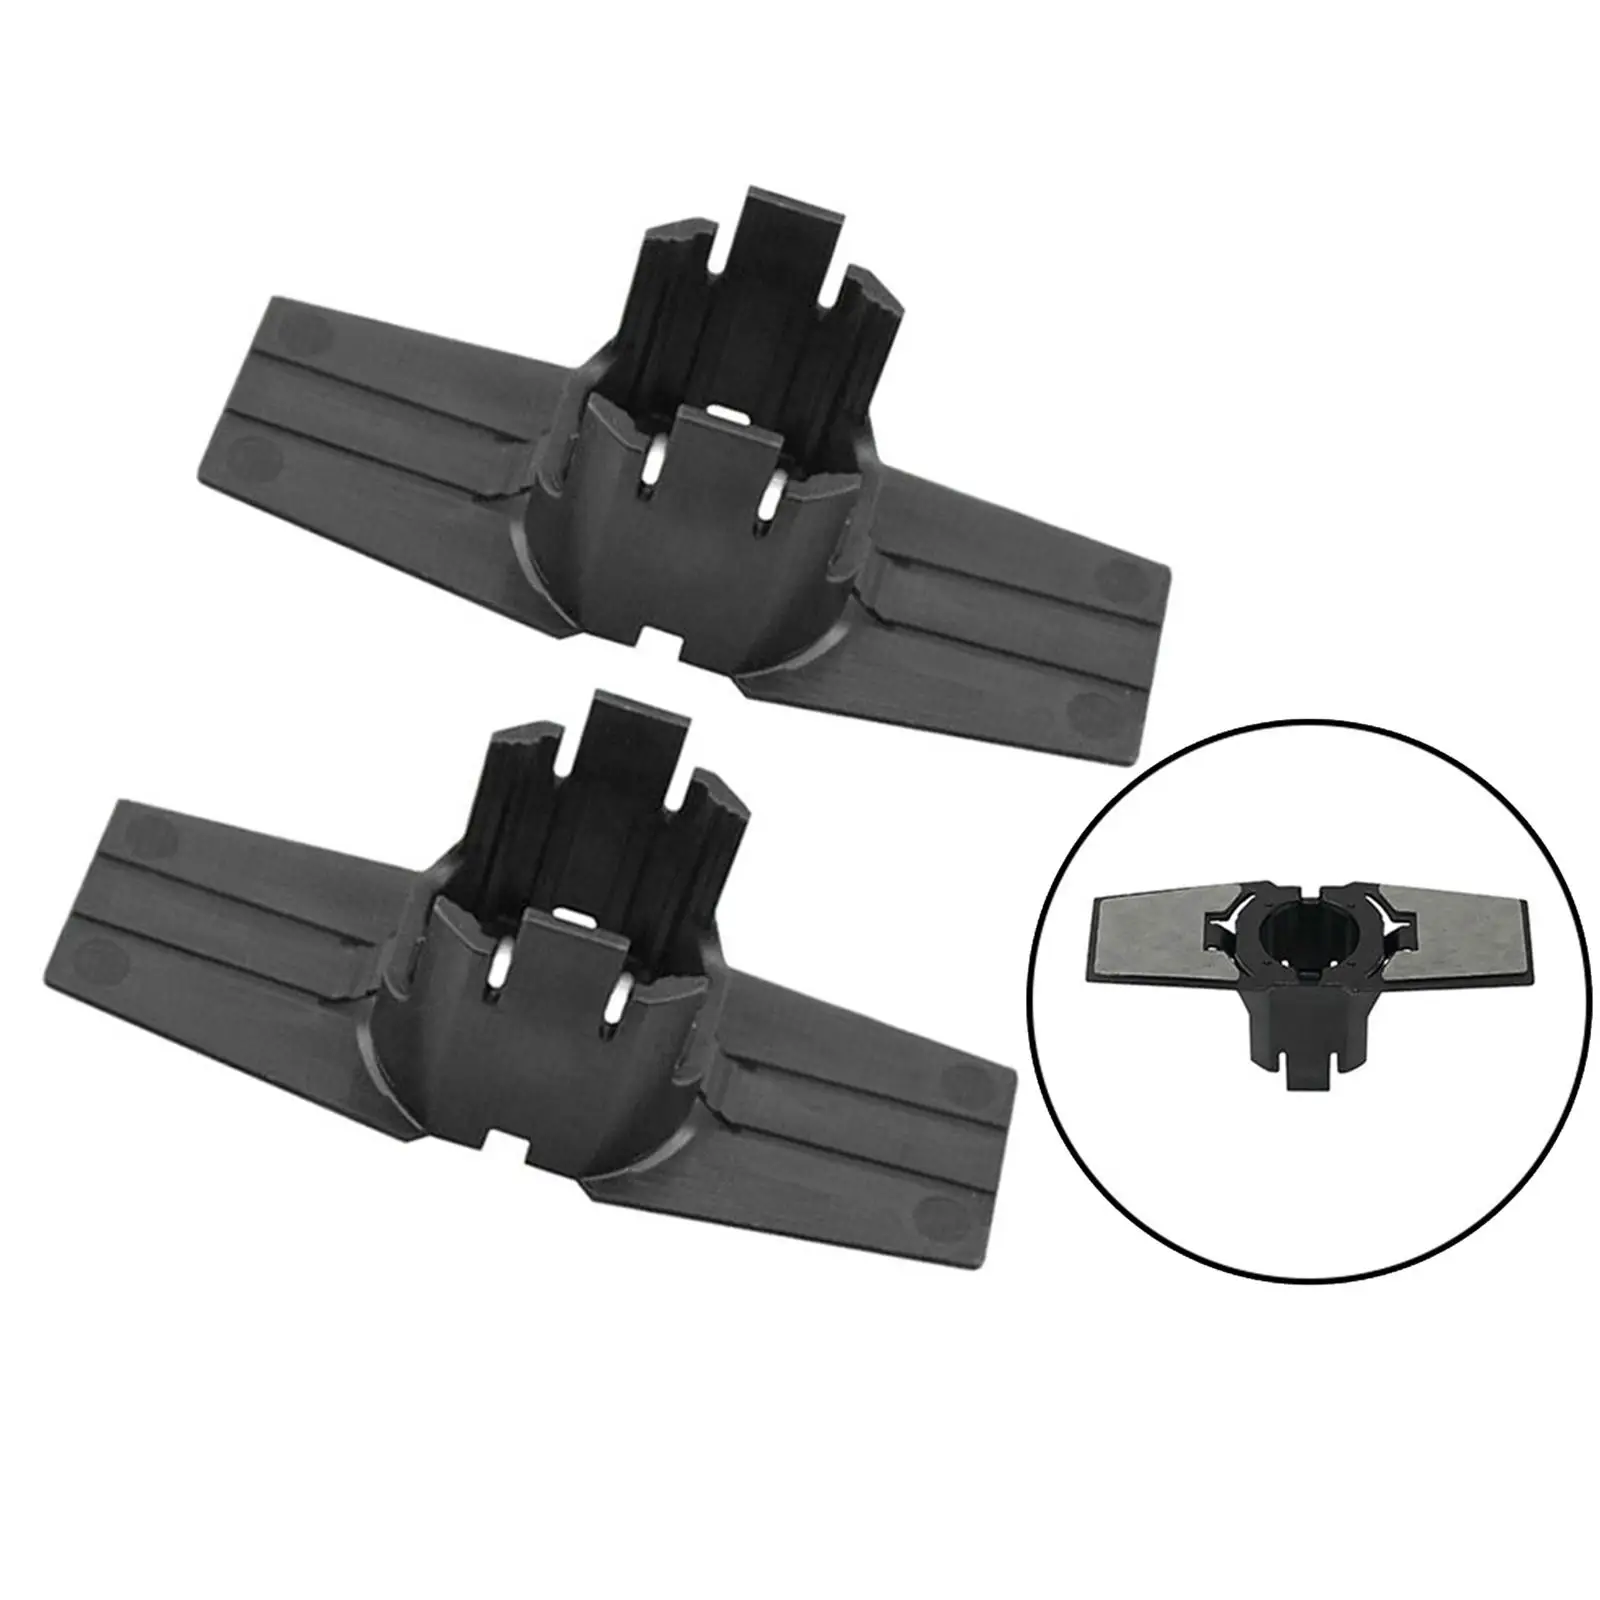 2 Bracket Cover, Automotive Direct Replaces Accessory Assist High Performance Black for 285335ZA0A